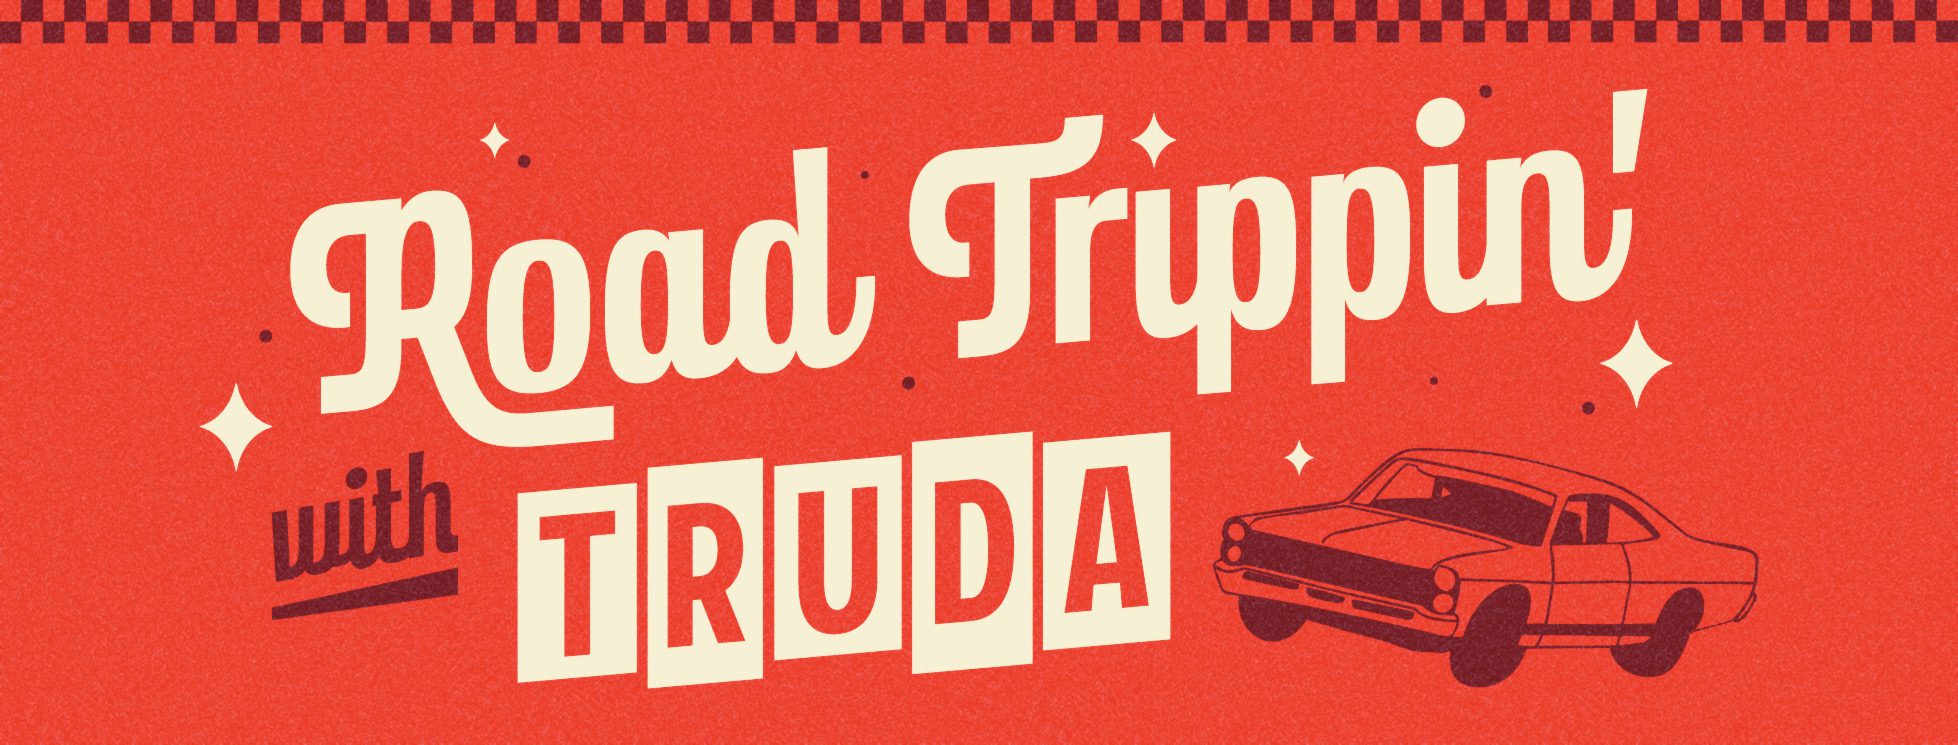 Orange block with Road Trippin' with Truda written with the image of a vintage car.